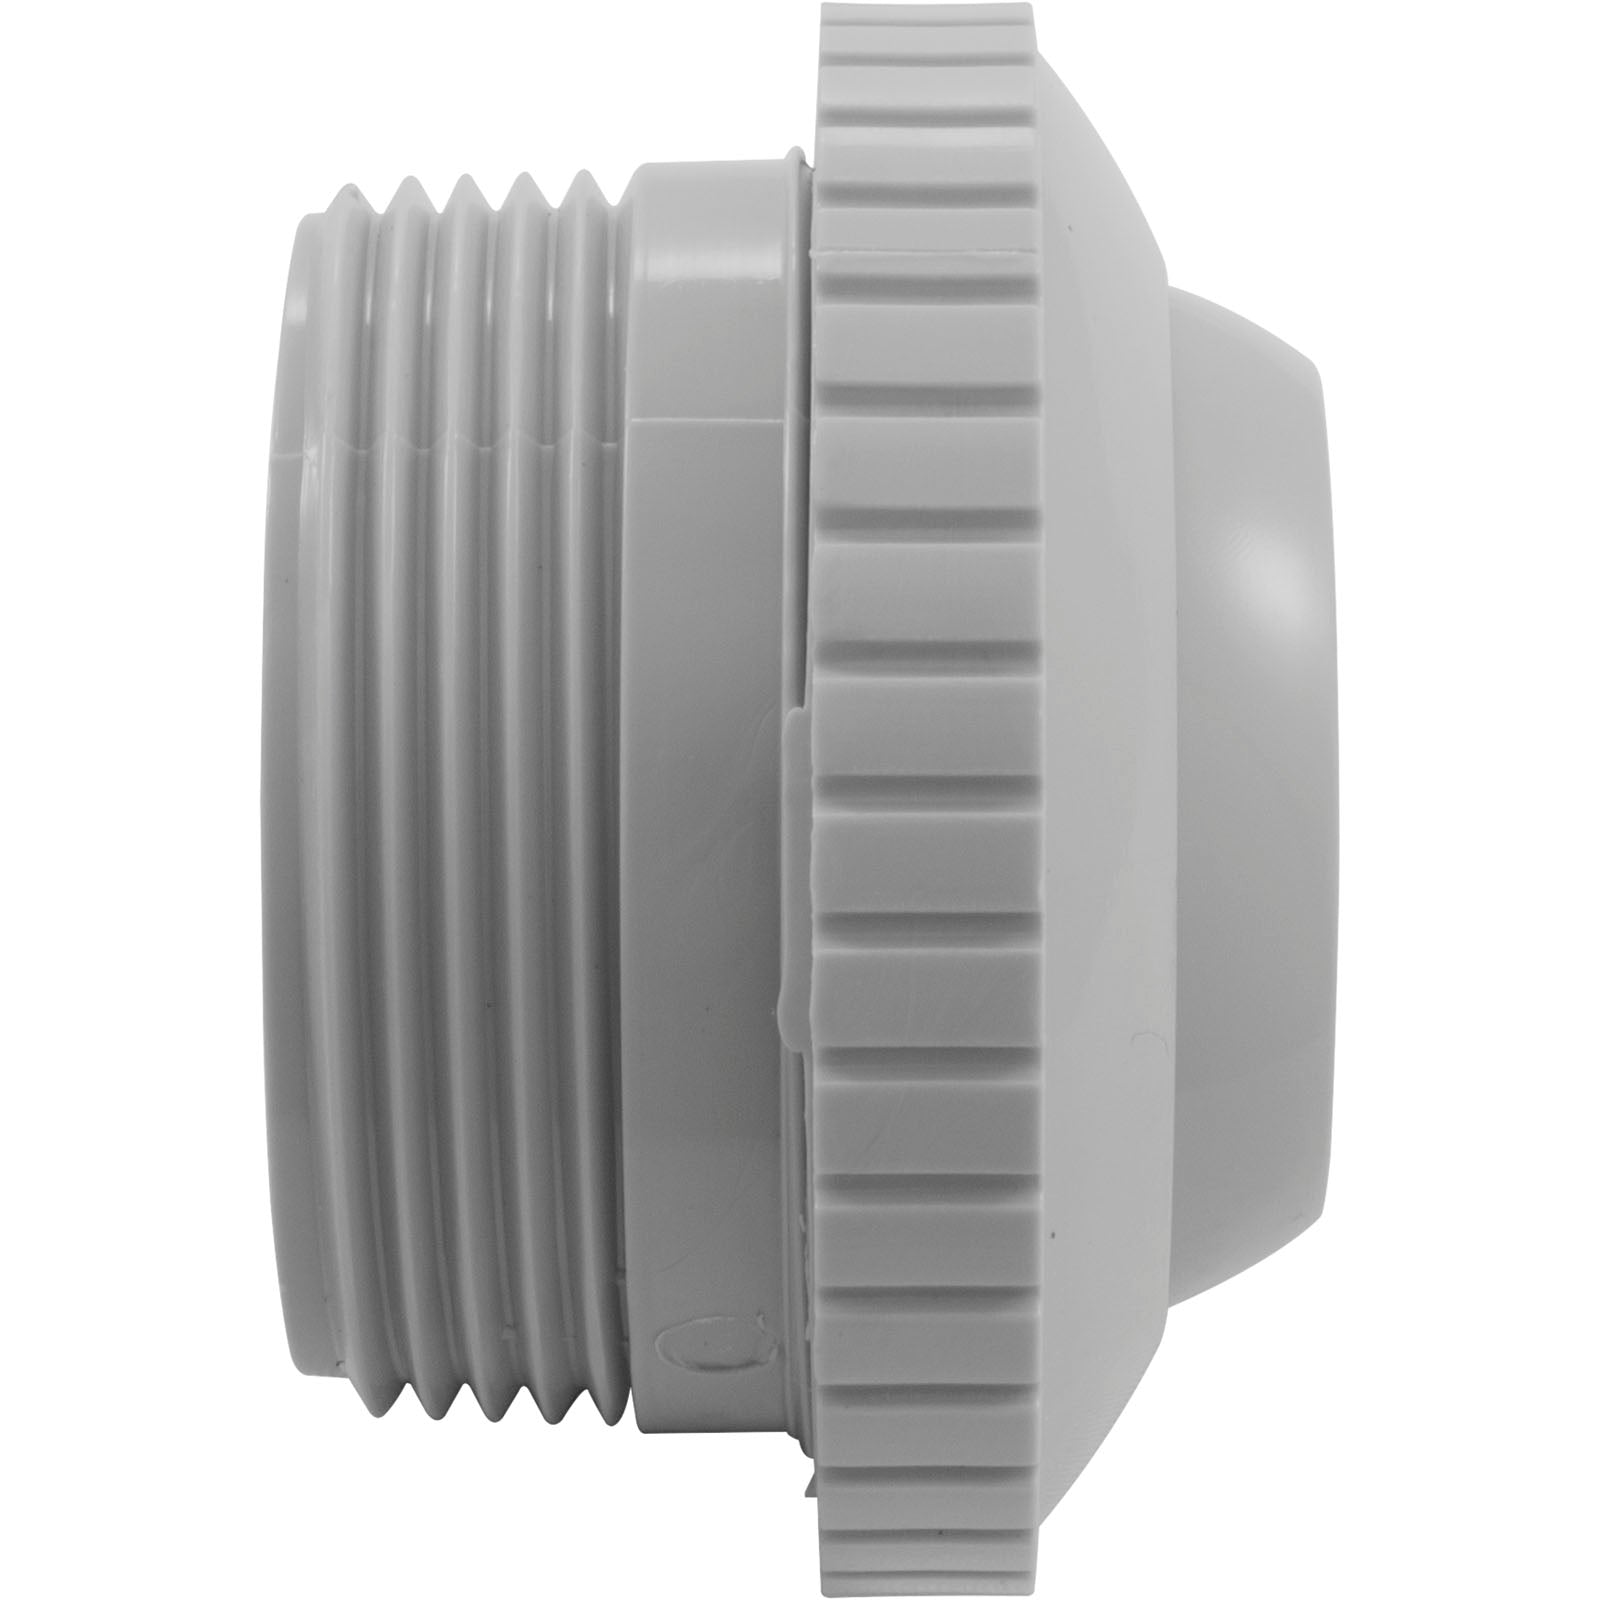 Directional Flow Inlet Ftg, Hayward Hydrosweep, 3/4", Gry SP1419DGR